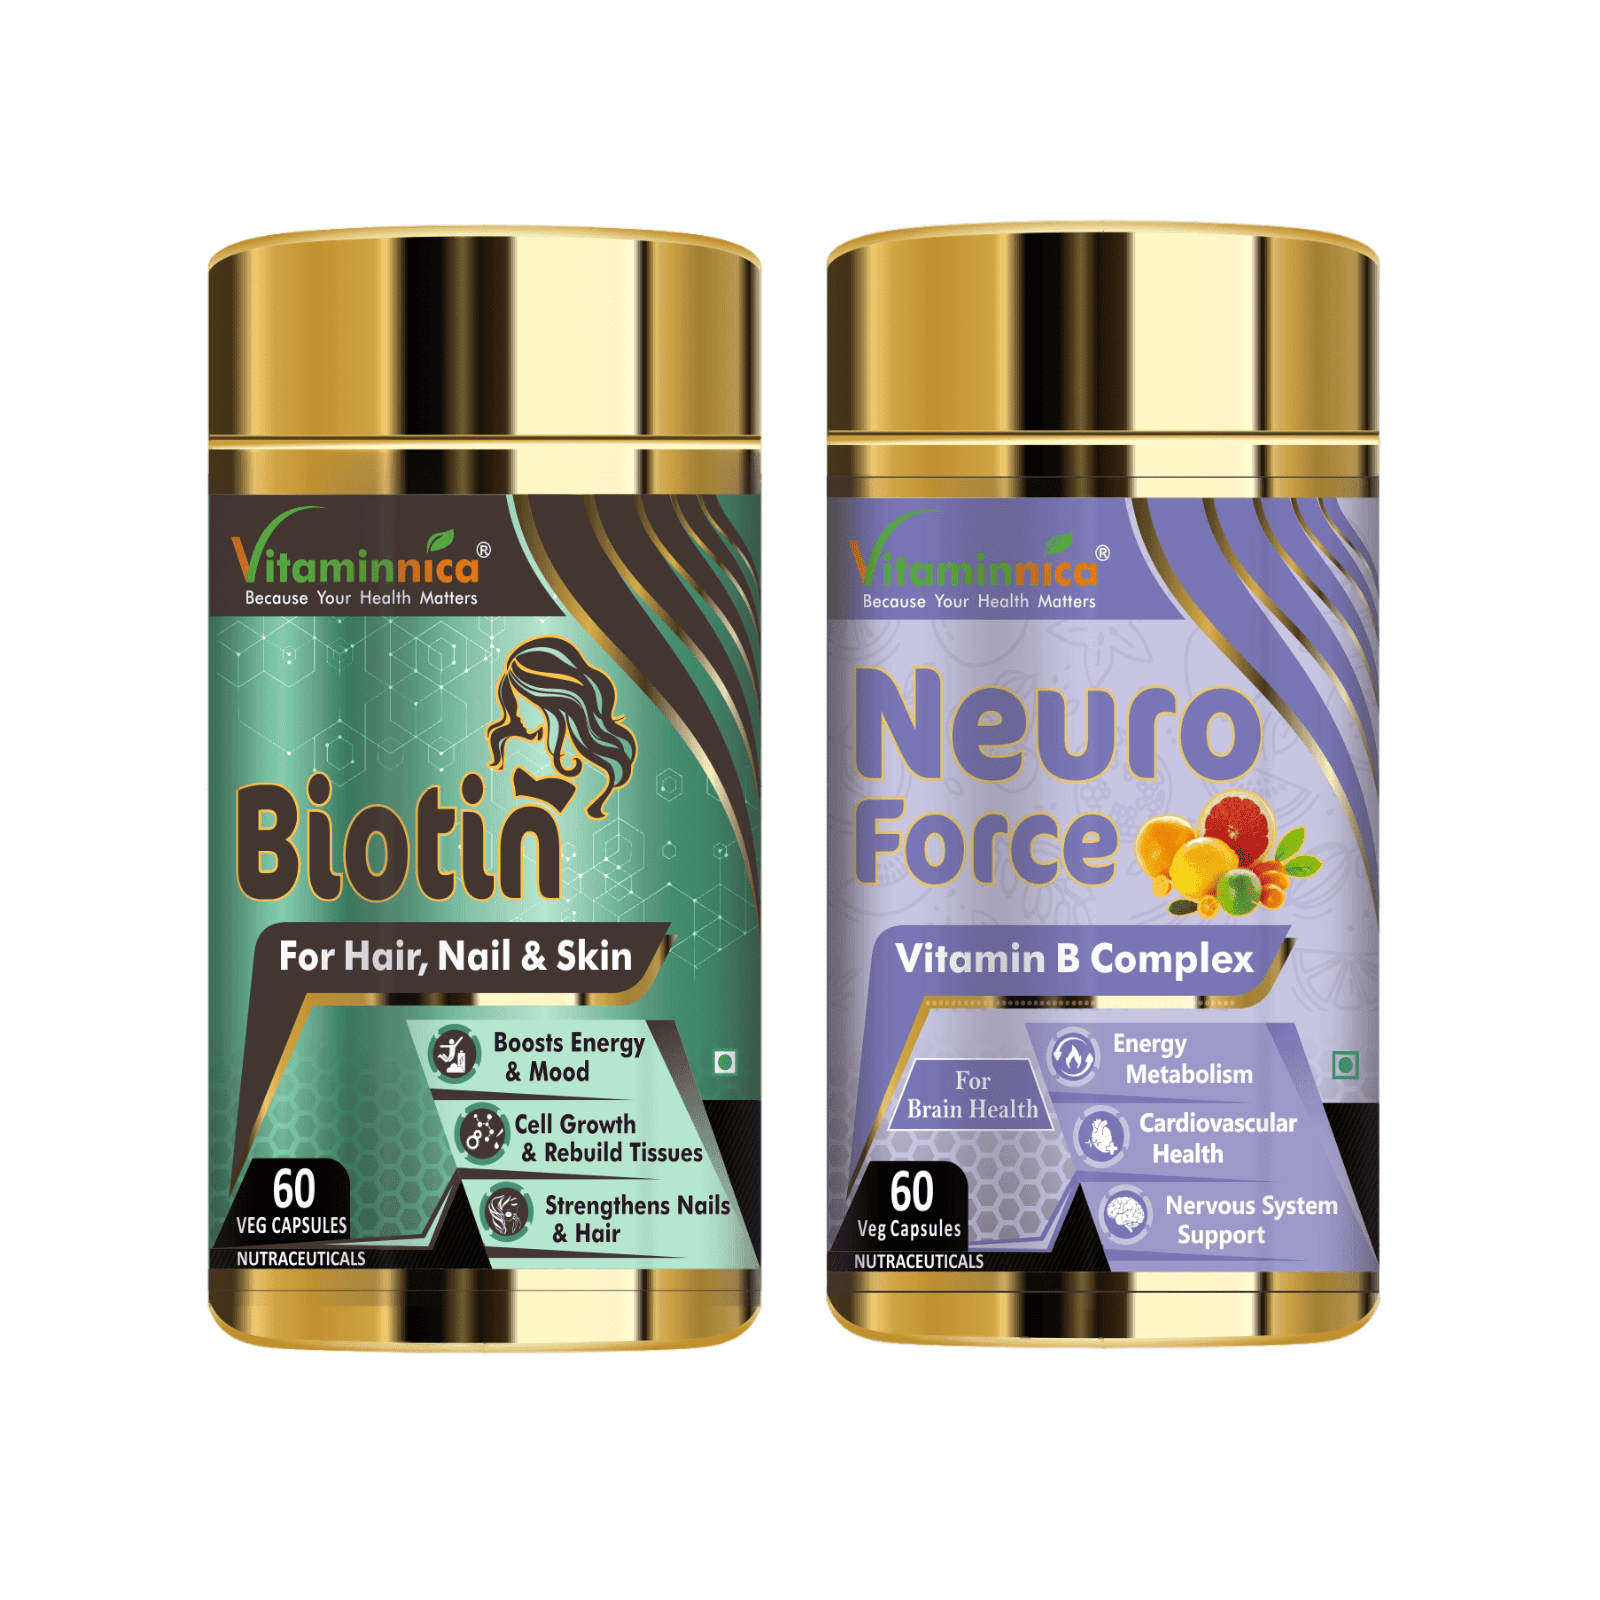 Biotin + Neuro Force Combo: Cognitive Function and Mental Focus - 120 Capsules - vitaminnicahealthcare